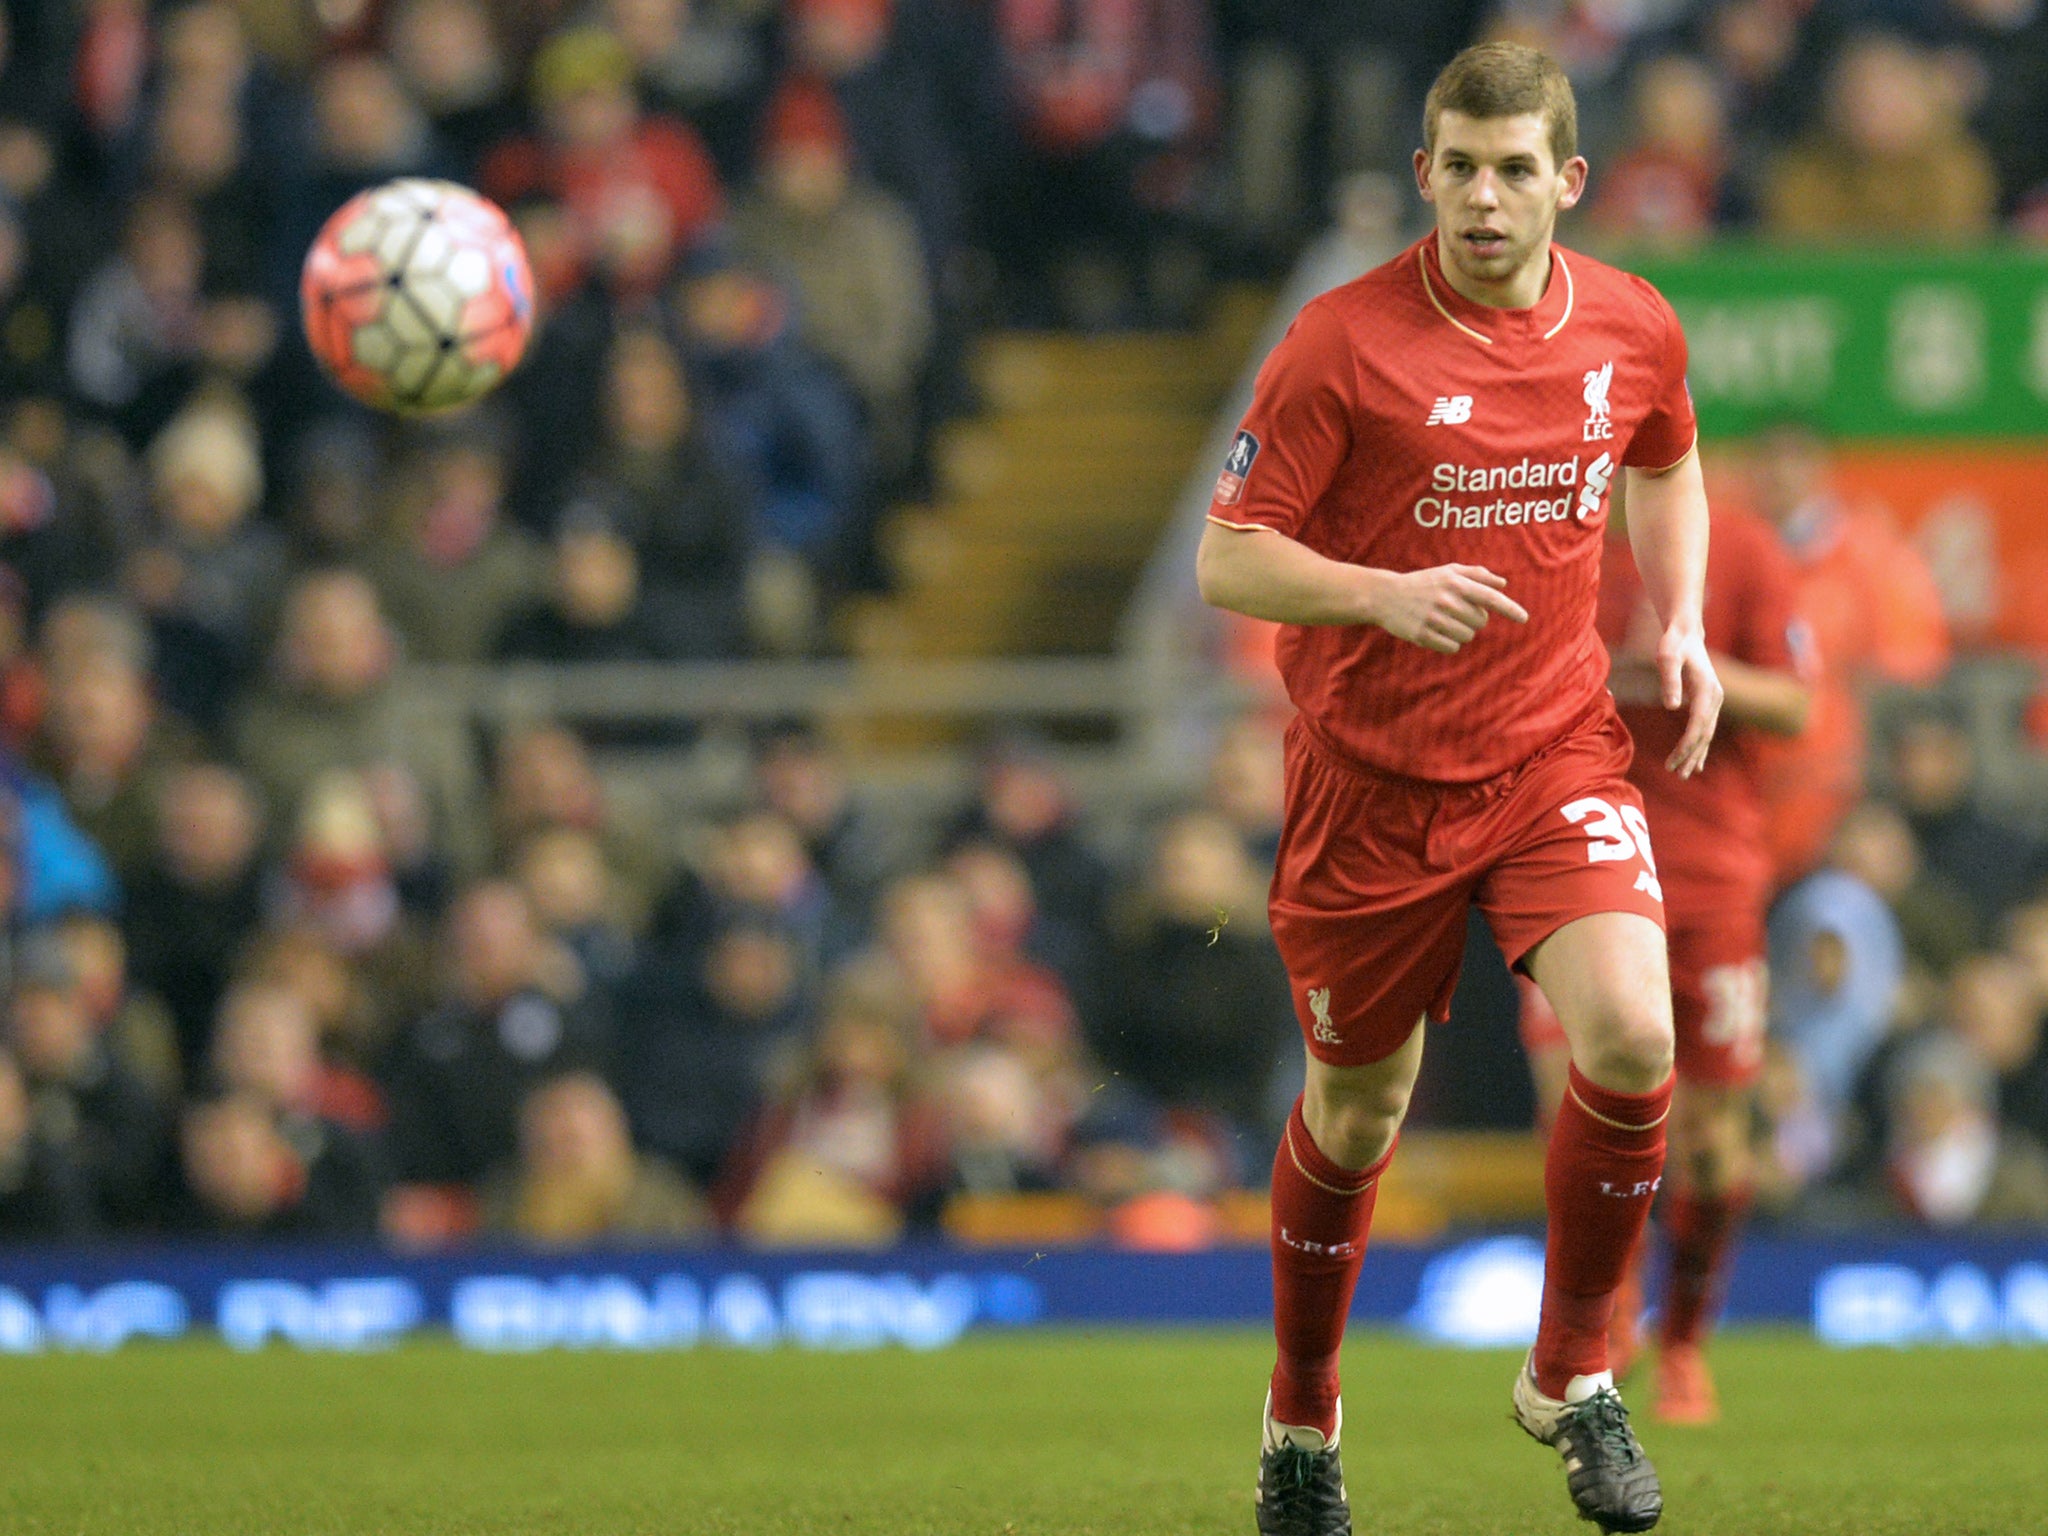 Jon Flanagan’s appearance last night was his first in 19 months following a succession of knee injuries